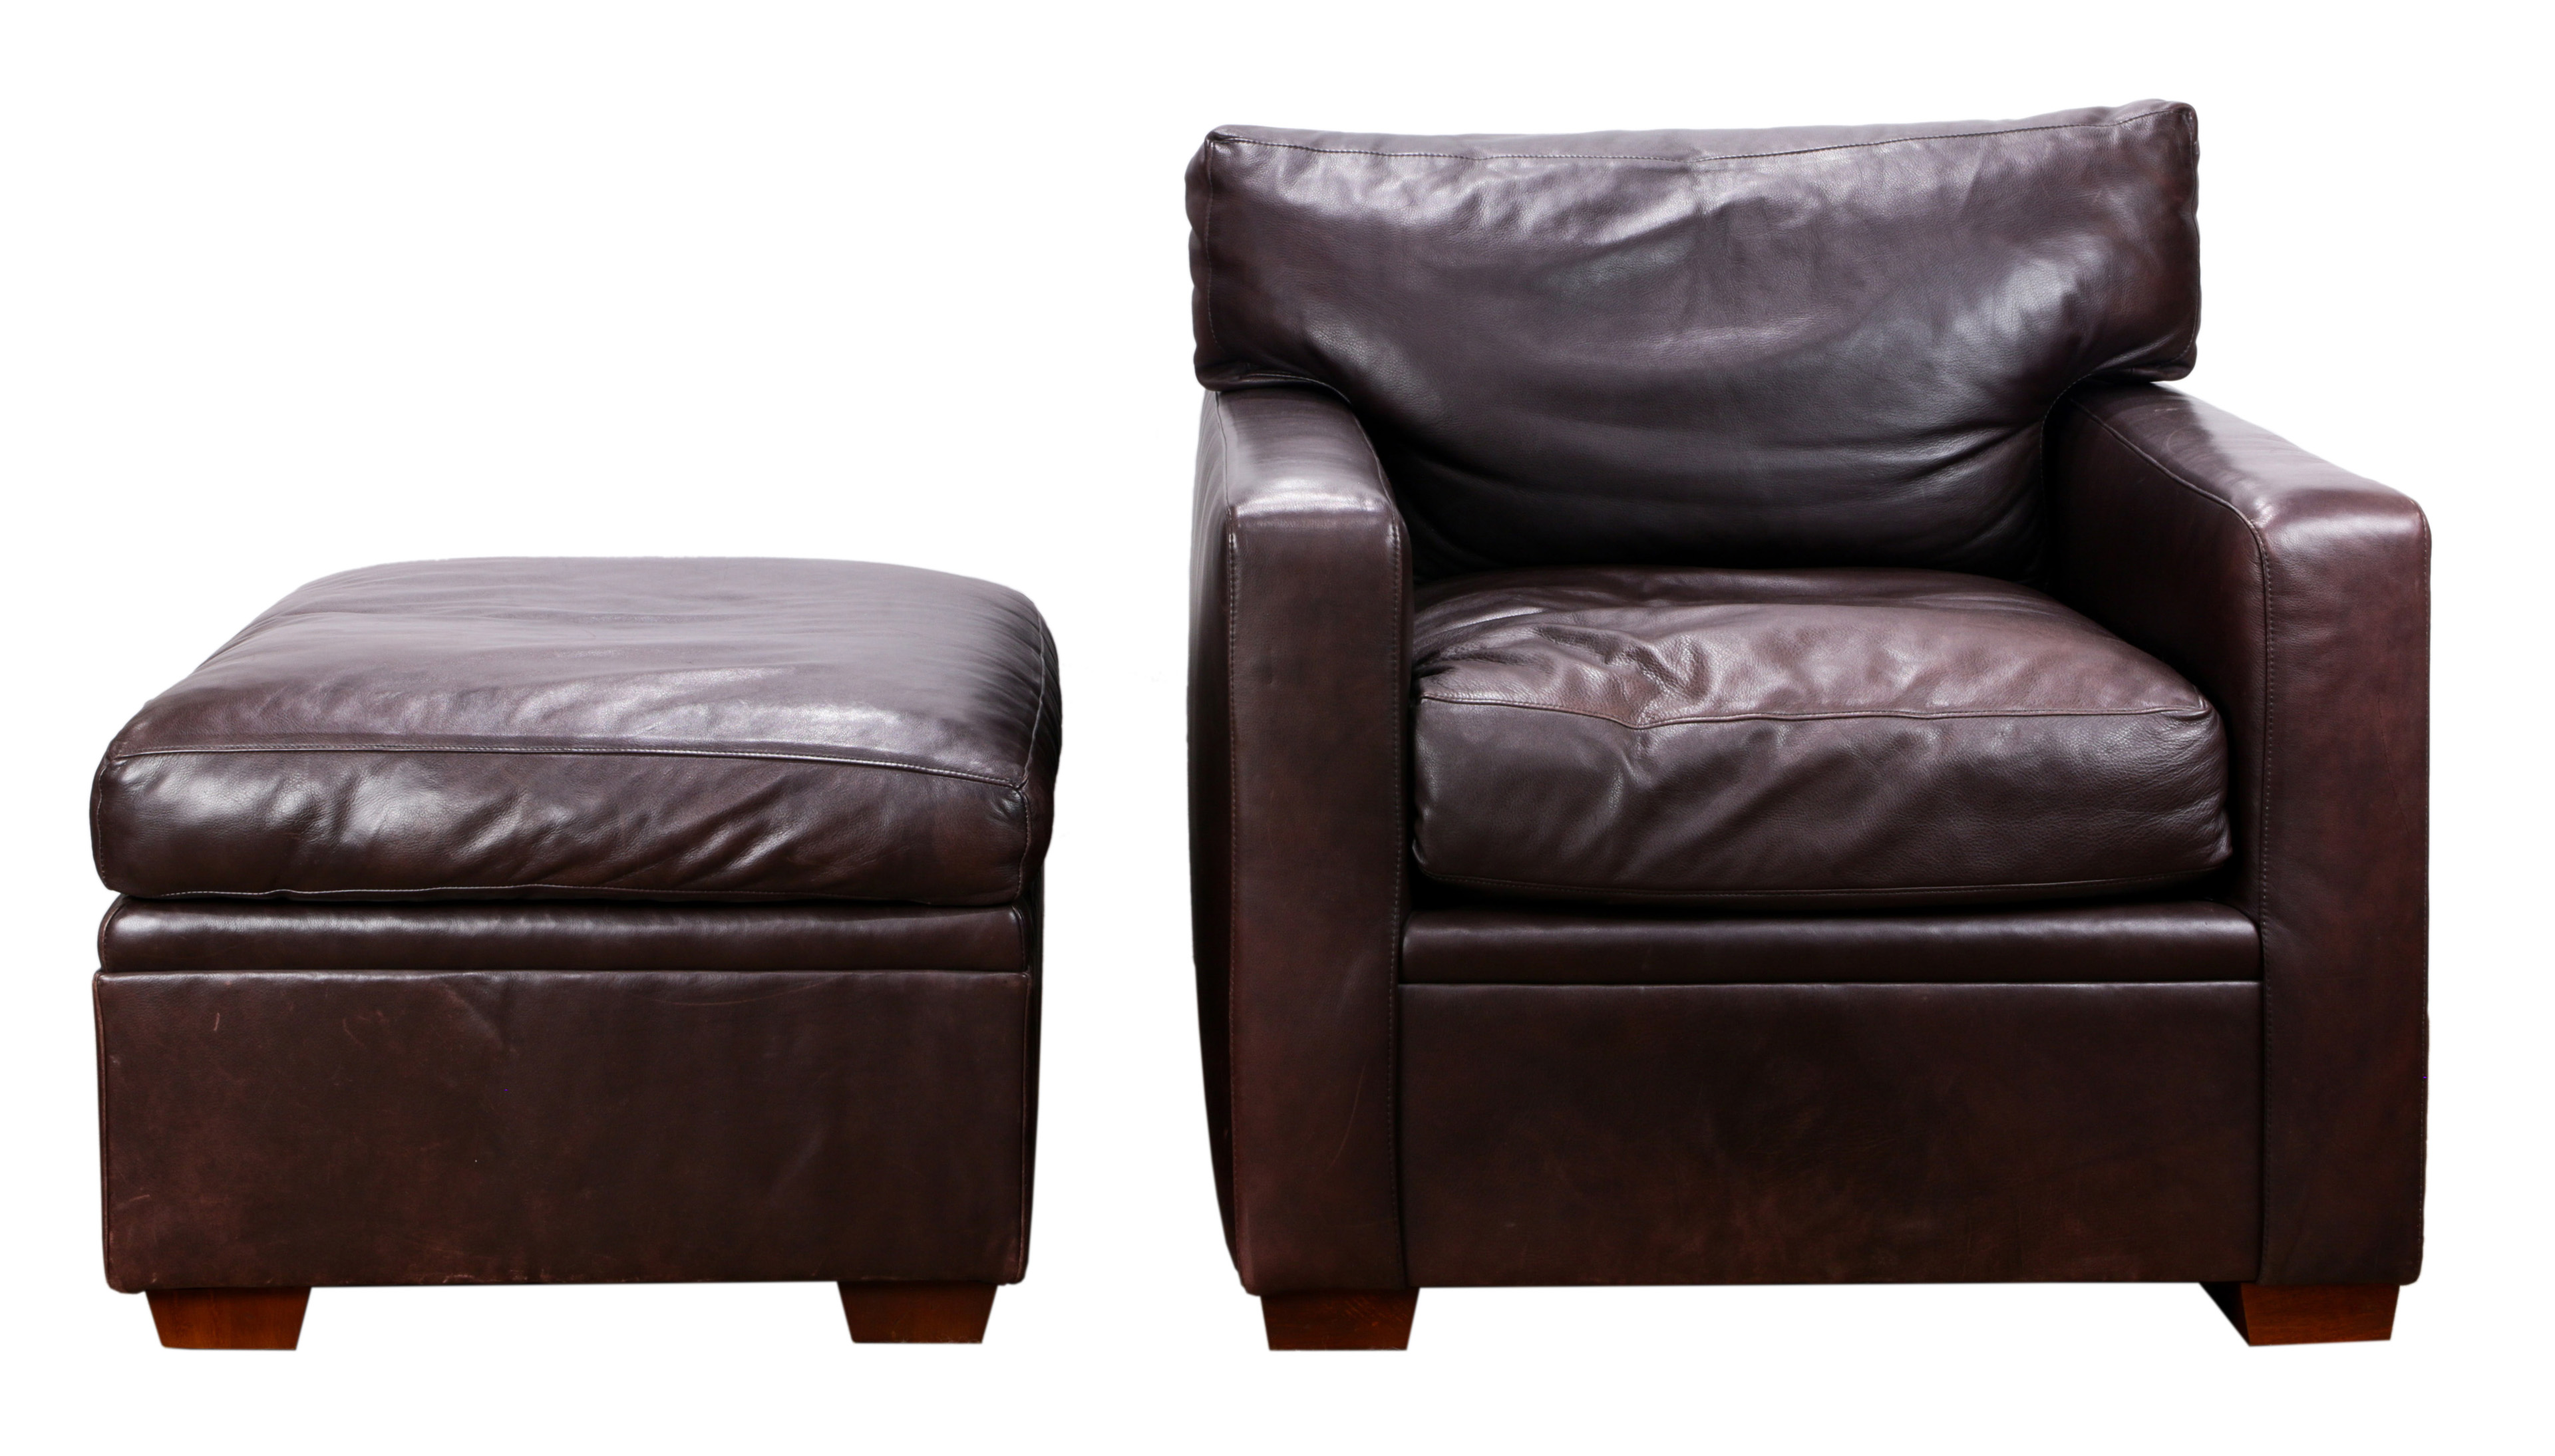 A RALPH LAUREN LEATHER LOUNGE CHAIR